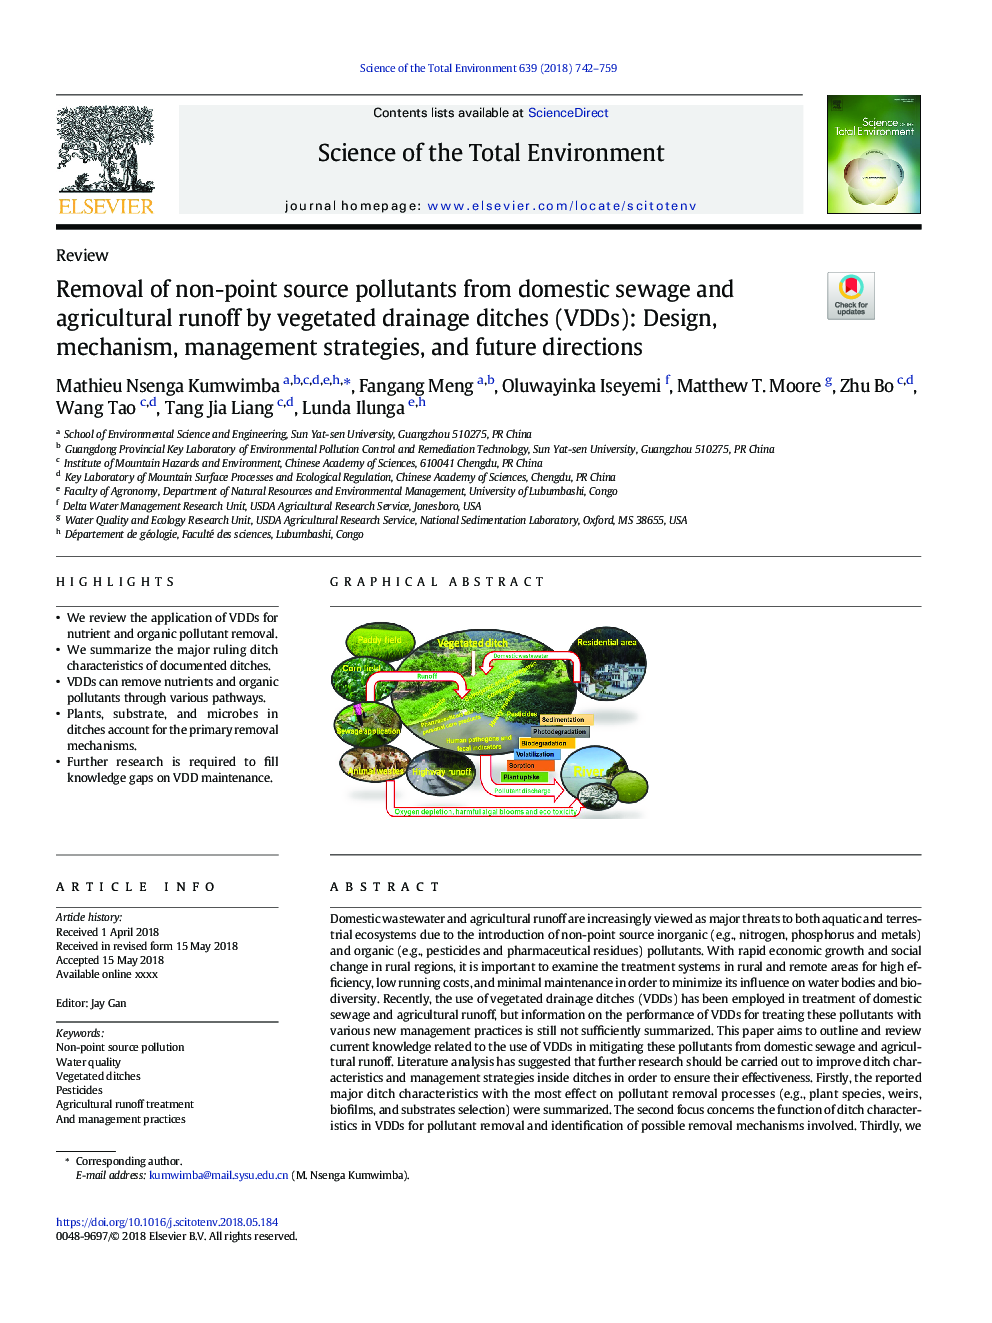 Removal of non-point source pollutants from domestic sewage and agricultural runoff by vegetated drainage ditches (VDDs): Design, mechanism, management strategies, and future directions